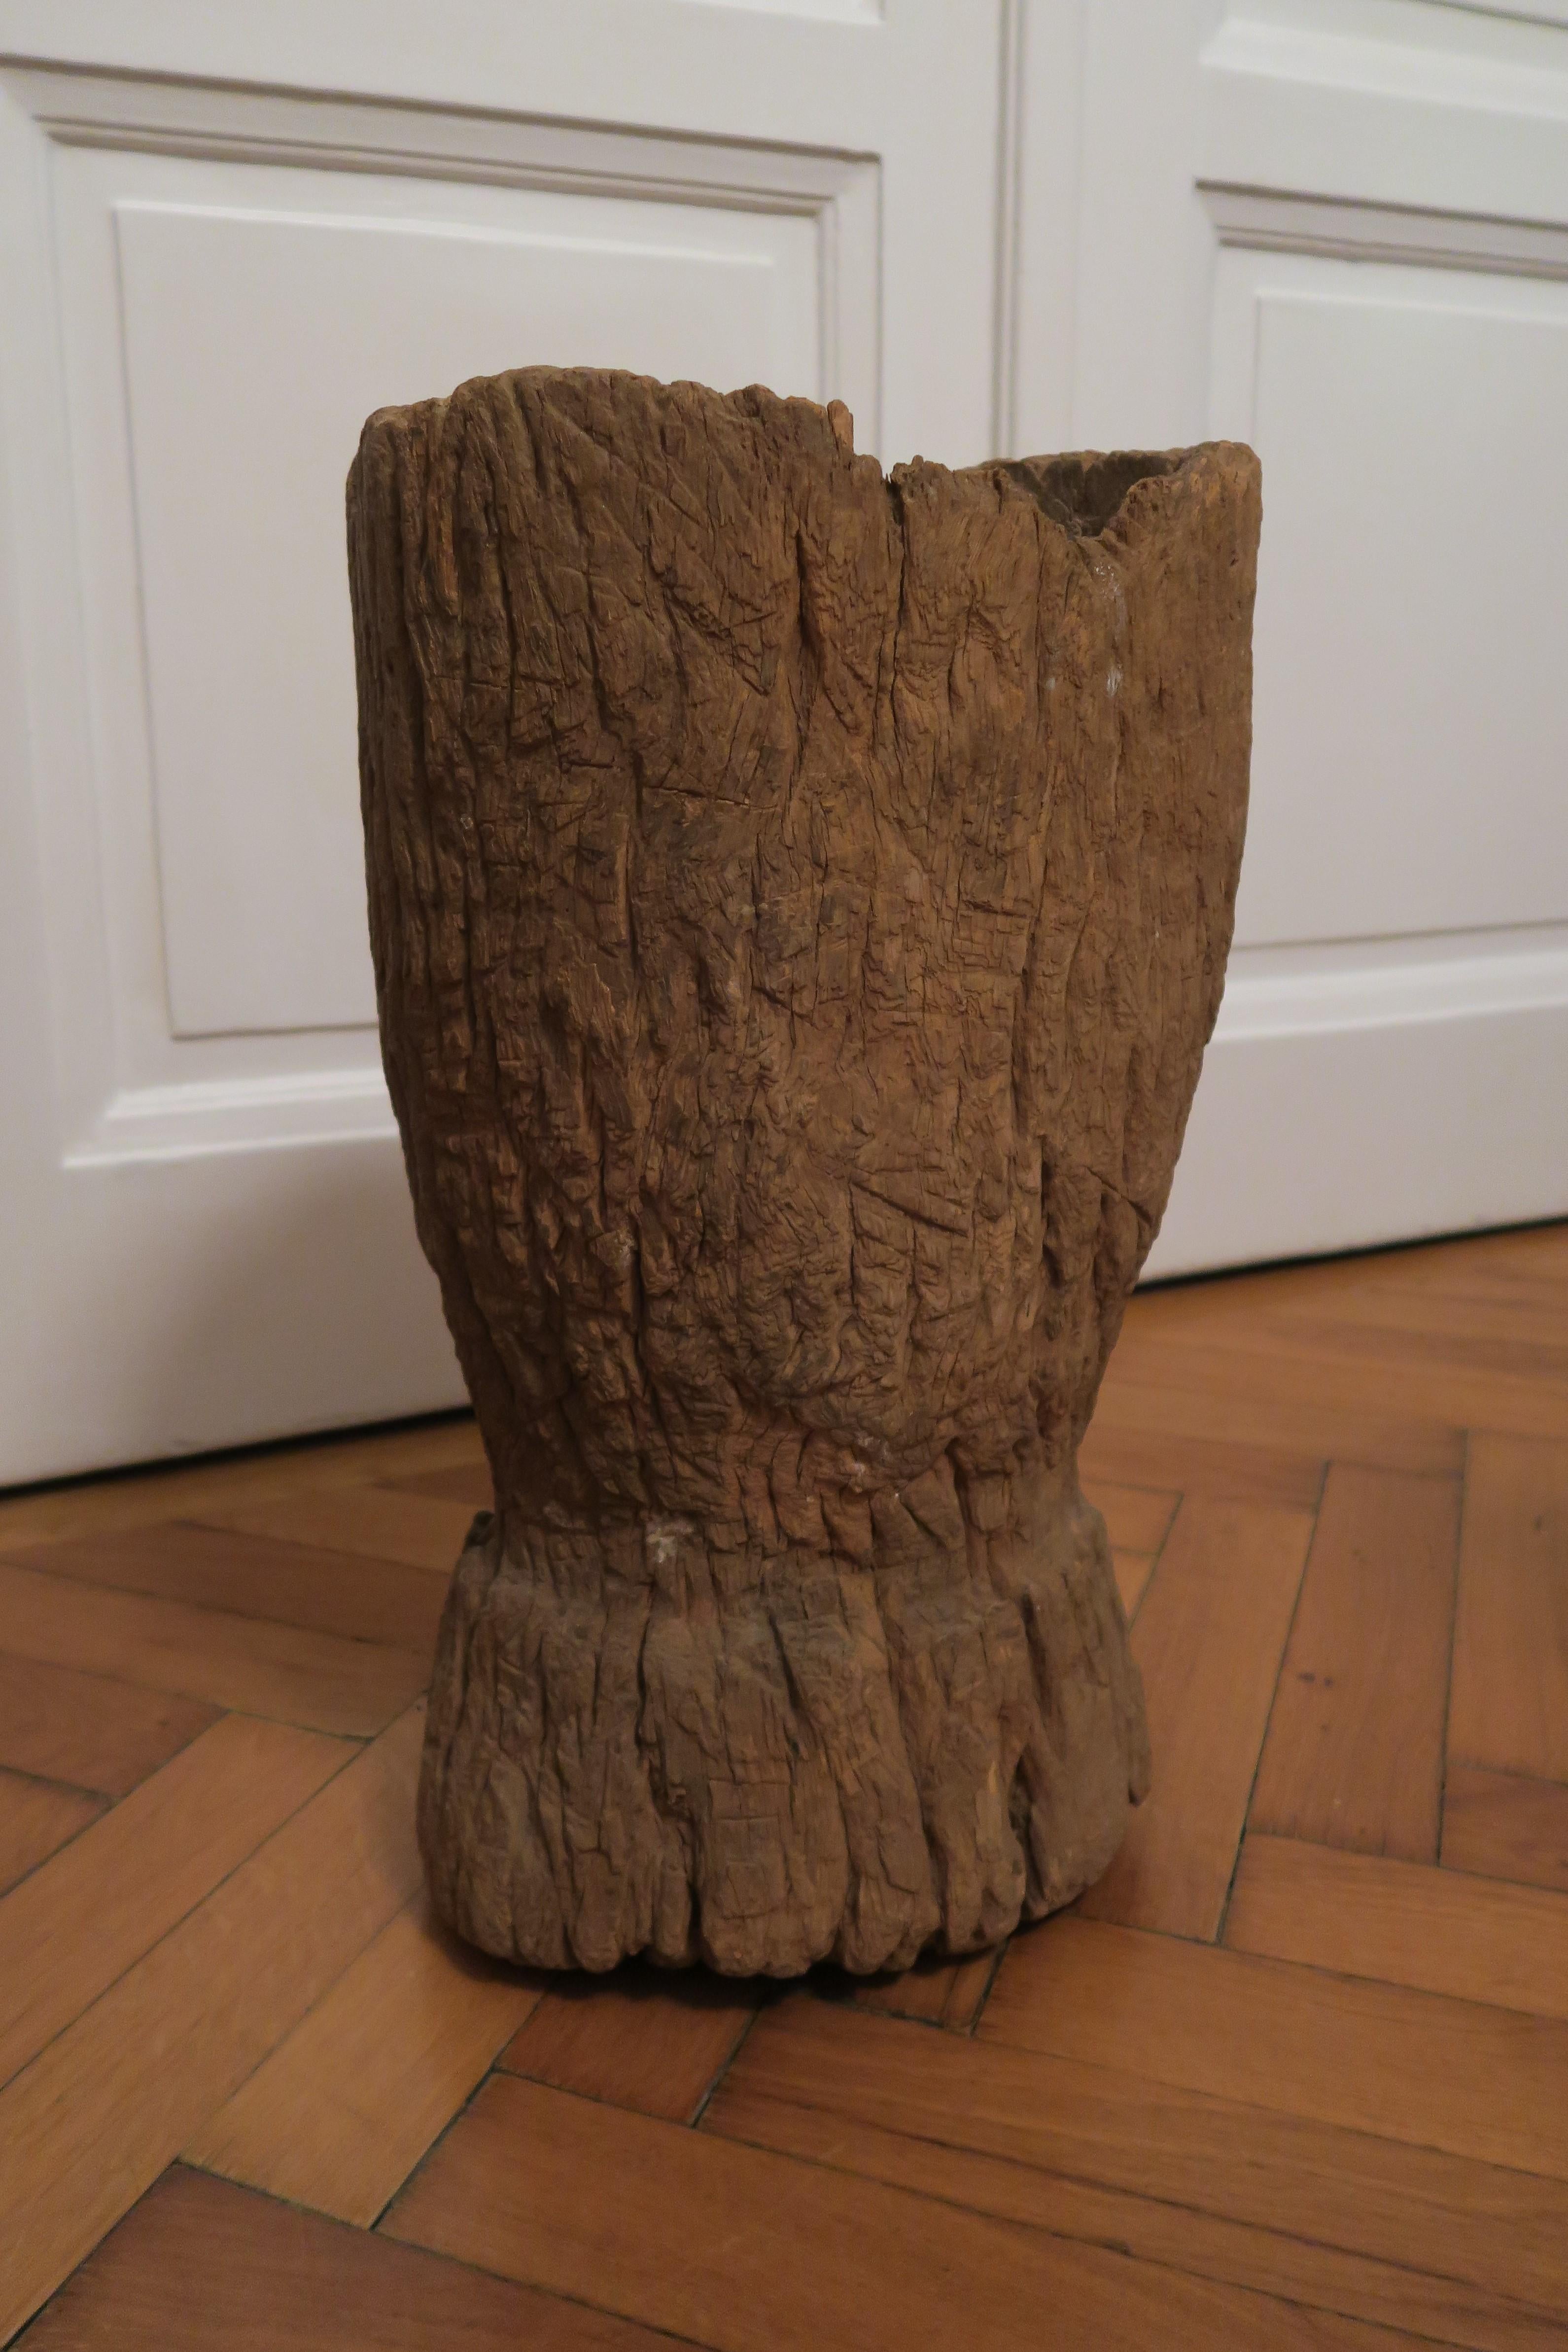 This very massive, exceptional mortar is hand carved from a lovely rust couloured iron wood. It was made in the 19th century on the African continent, possibly in Ghana. The bowl's surface is rough and very detailed. The underside of the foot is